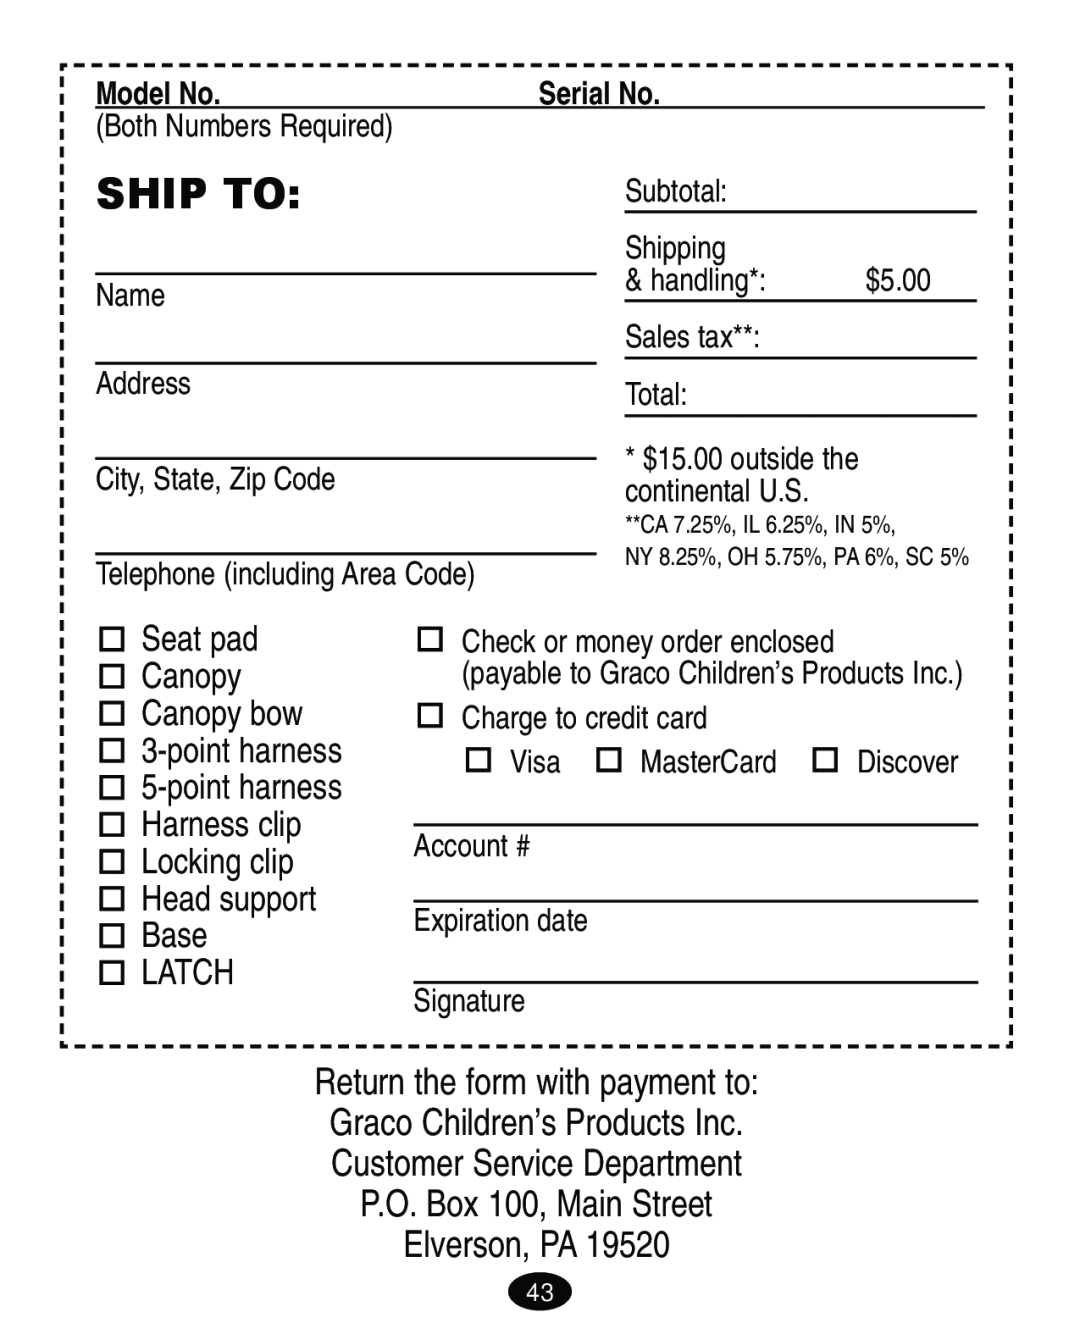 Graco 4460402 manual Ship To, Return the form with payment to Graco Children’s Products Inc 